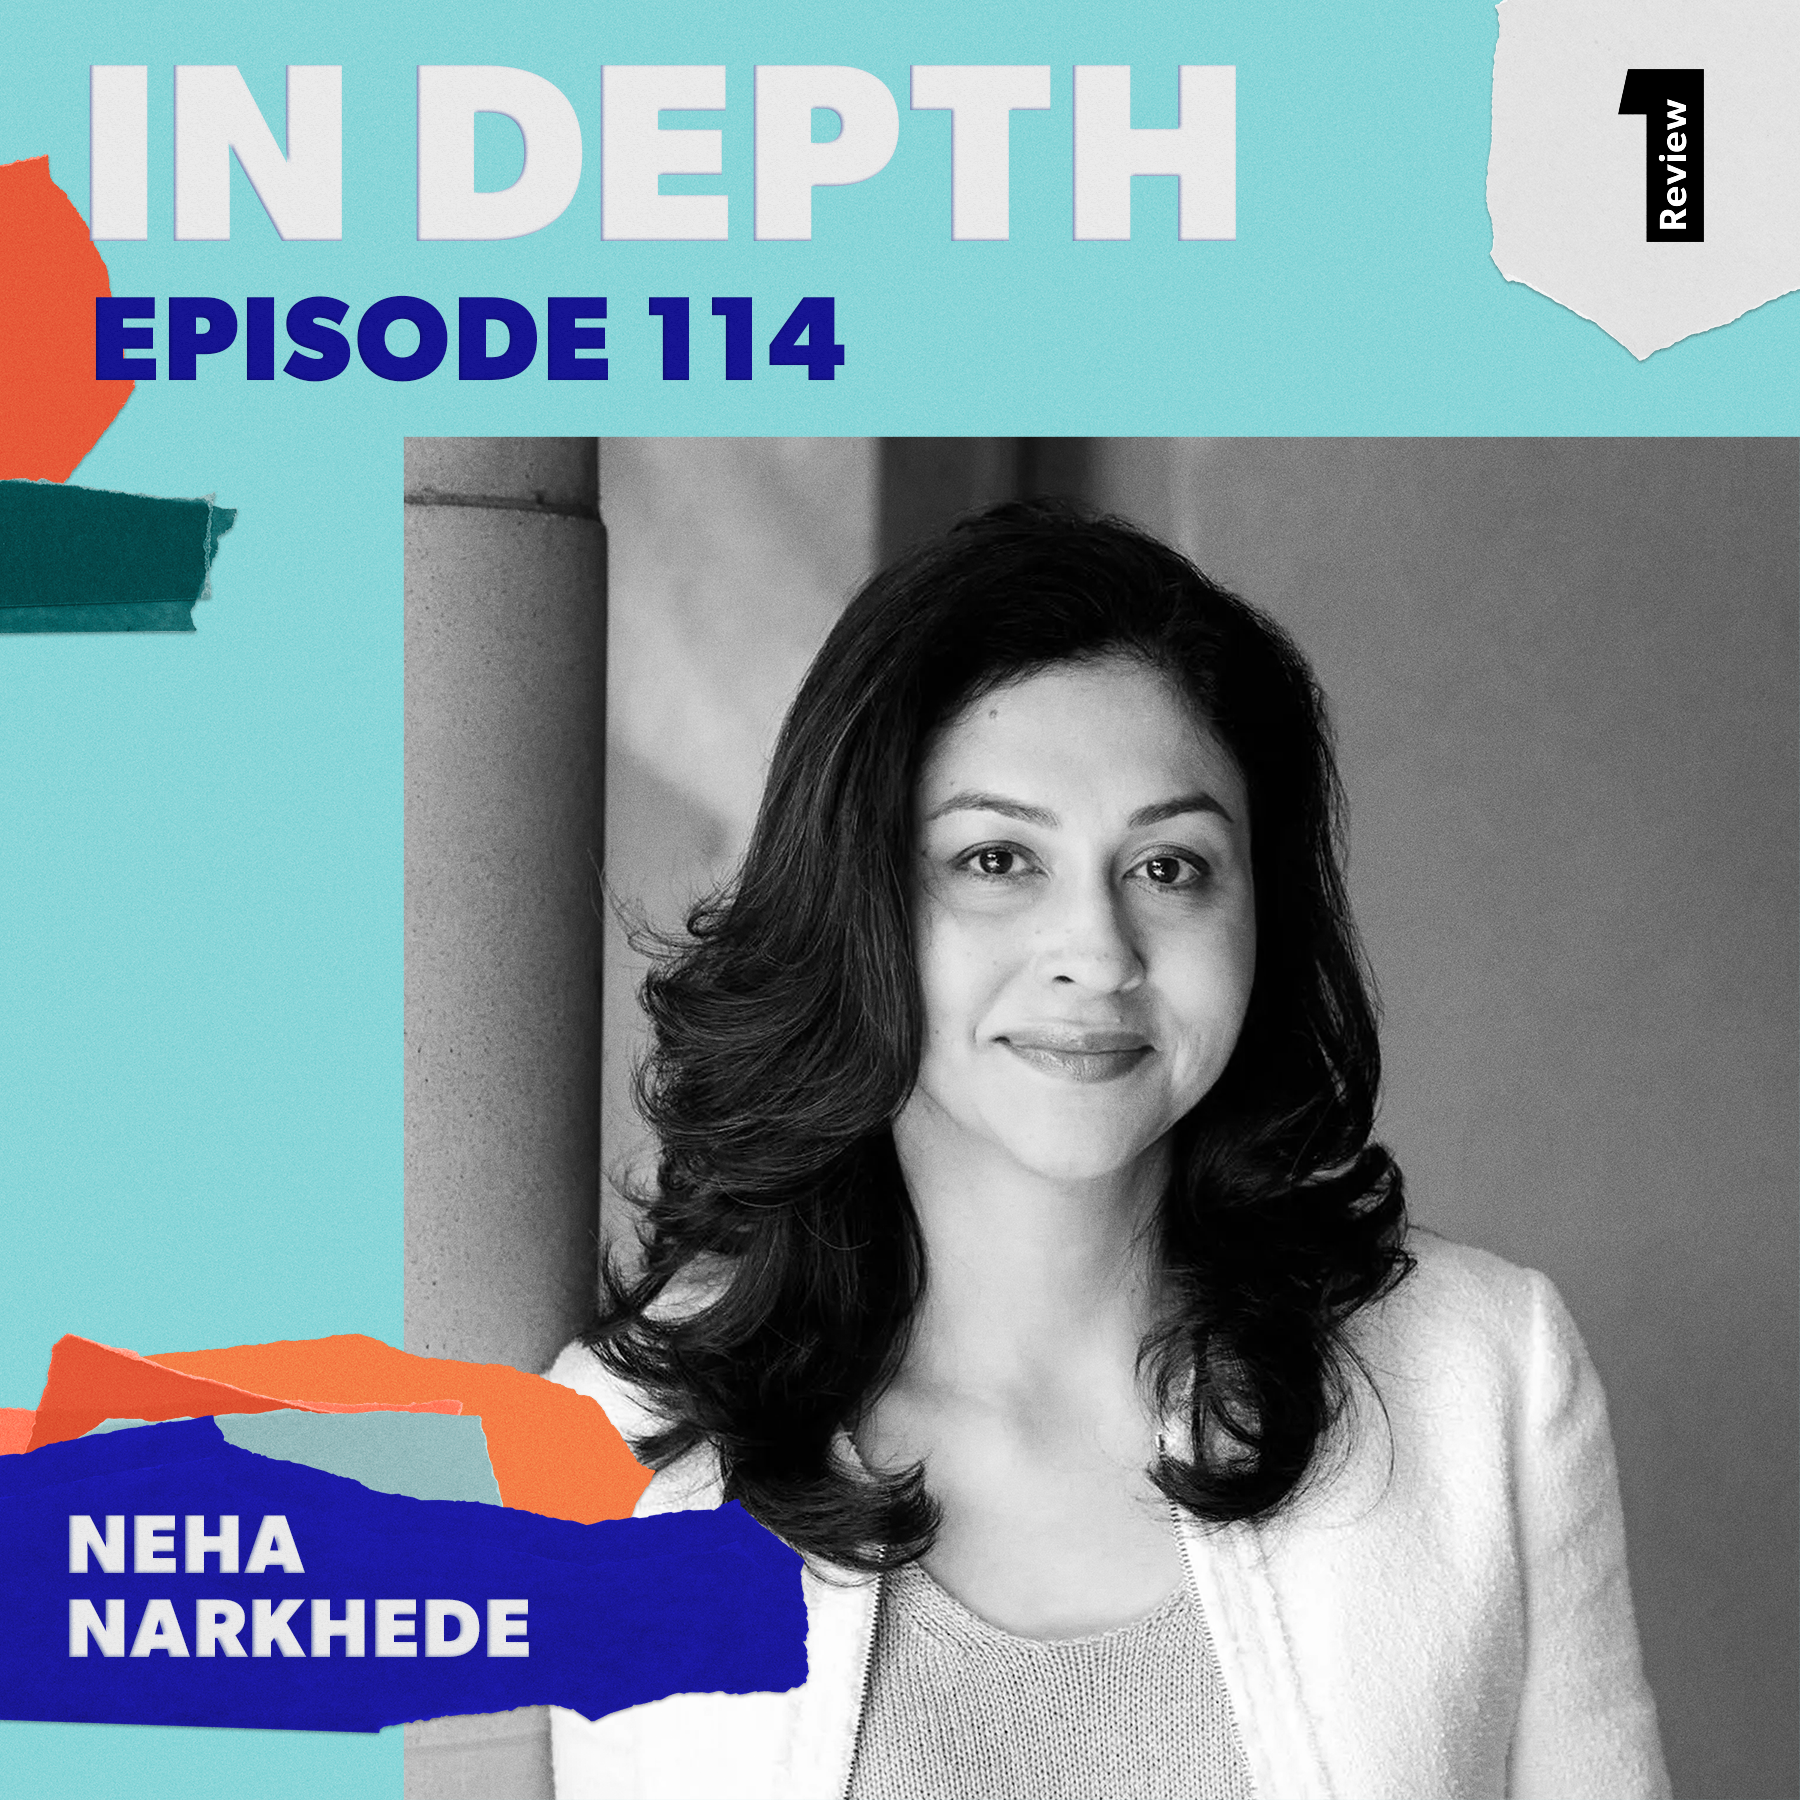 Winning with open and closed source products | Neha Narkhede (Co-founder at Confluent and Oscilar)